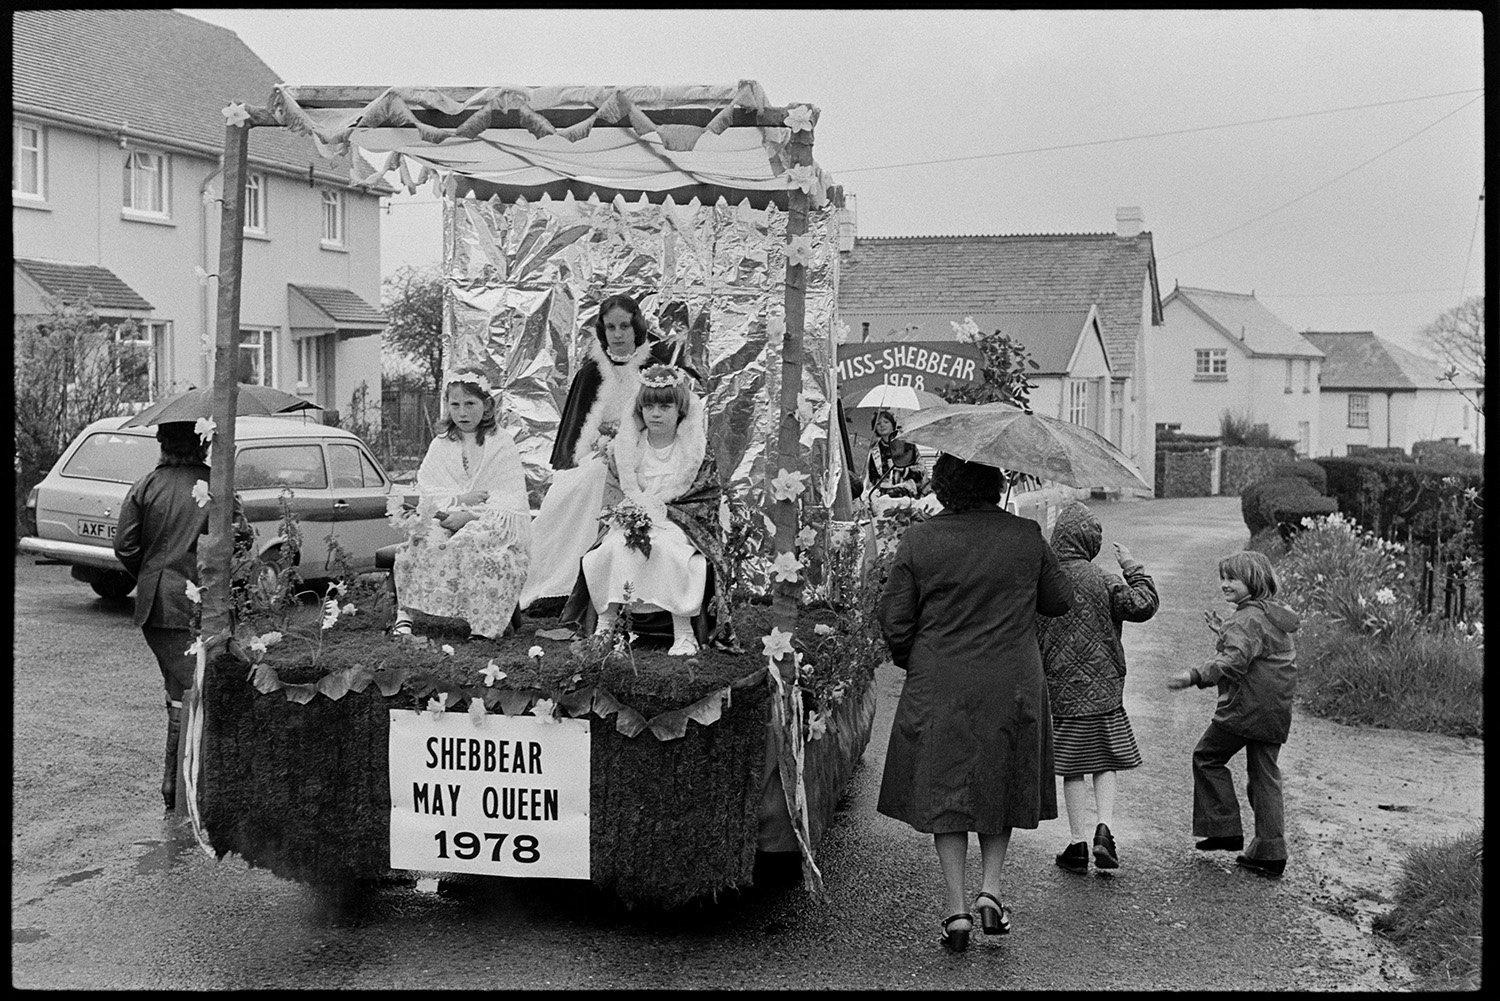 Carnival procession with Queen on decorated float, rain, spectators and Brass Band. 
[The Shebbear May Queen and two attendants sitting on a decorated trailer going to Shebbear Carnival. Miss-Shebbear is travelling on a trailer in front of the May Queen further along the street. Spectators are walking by the trailer holding umbrellas.]